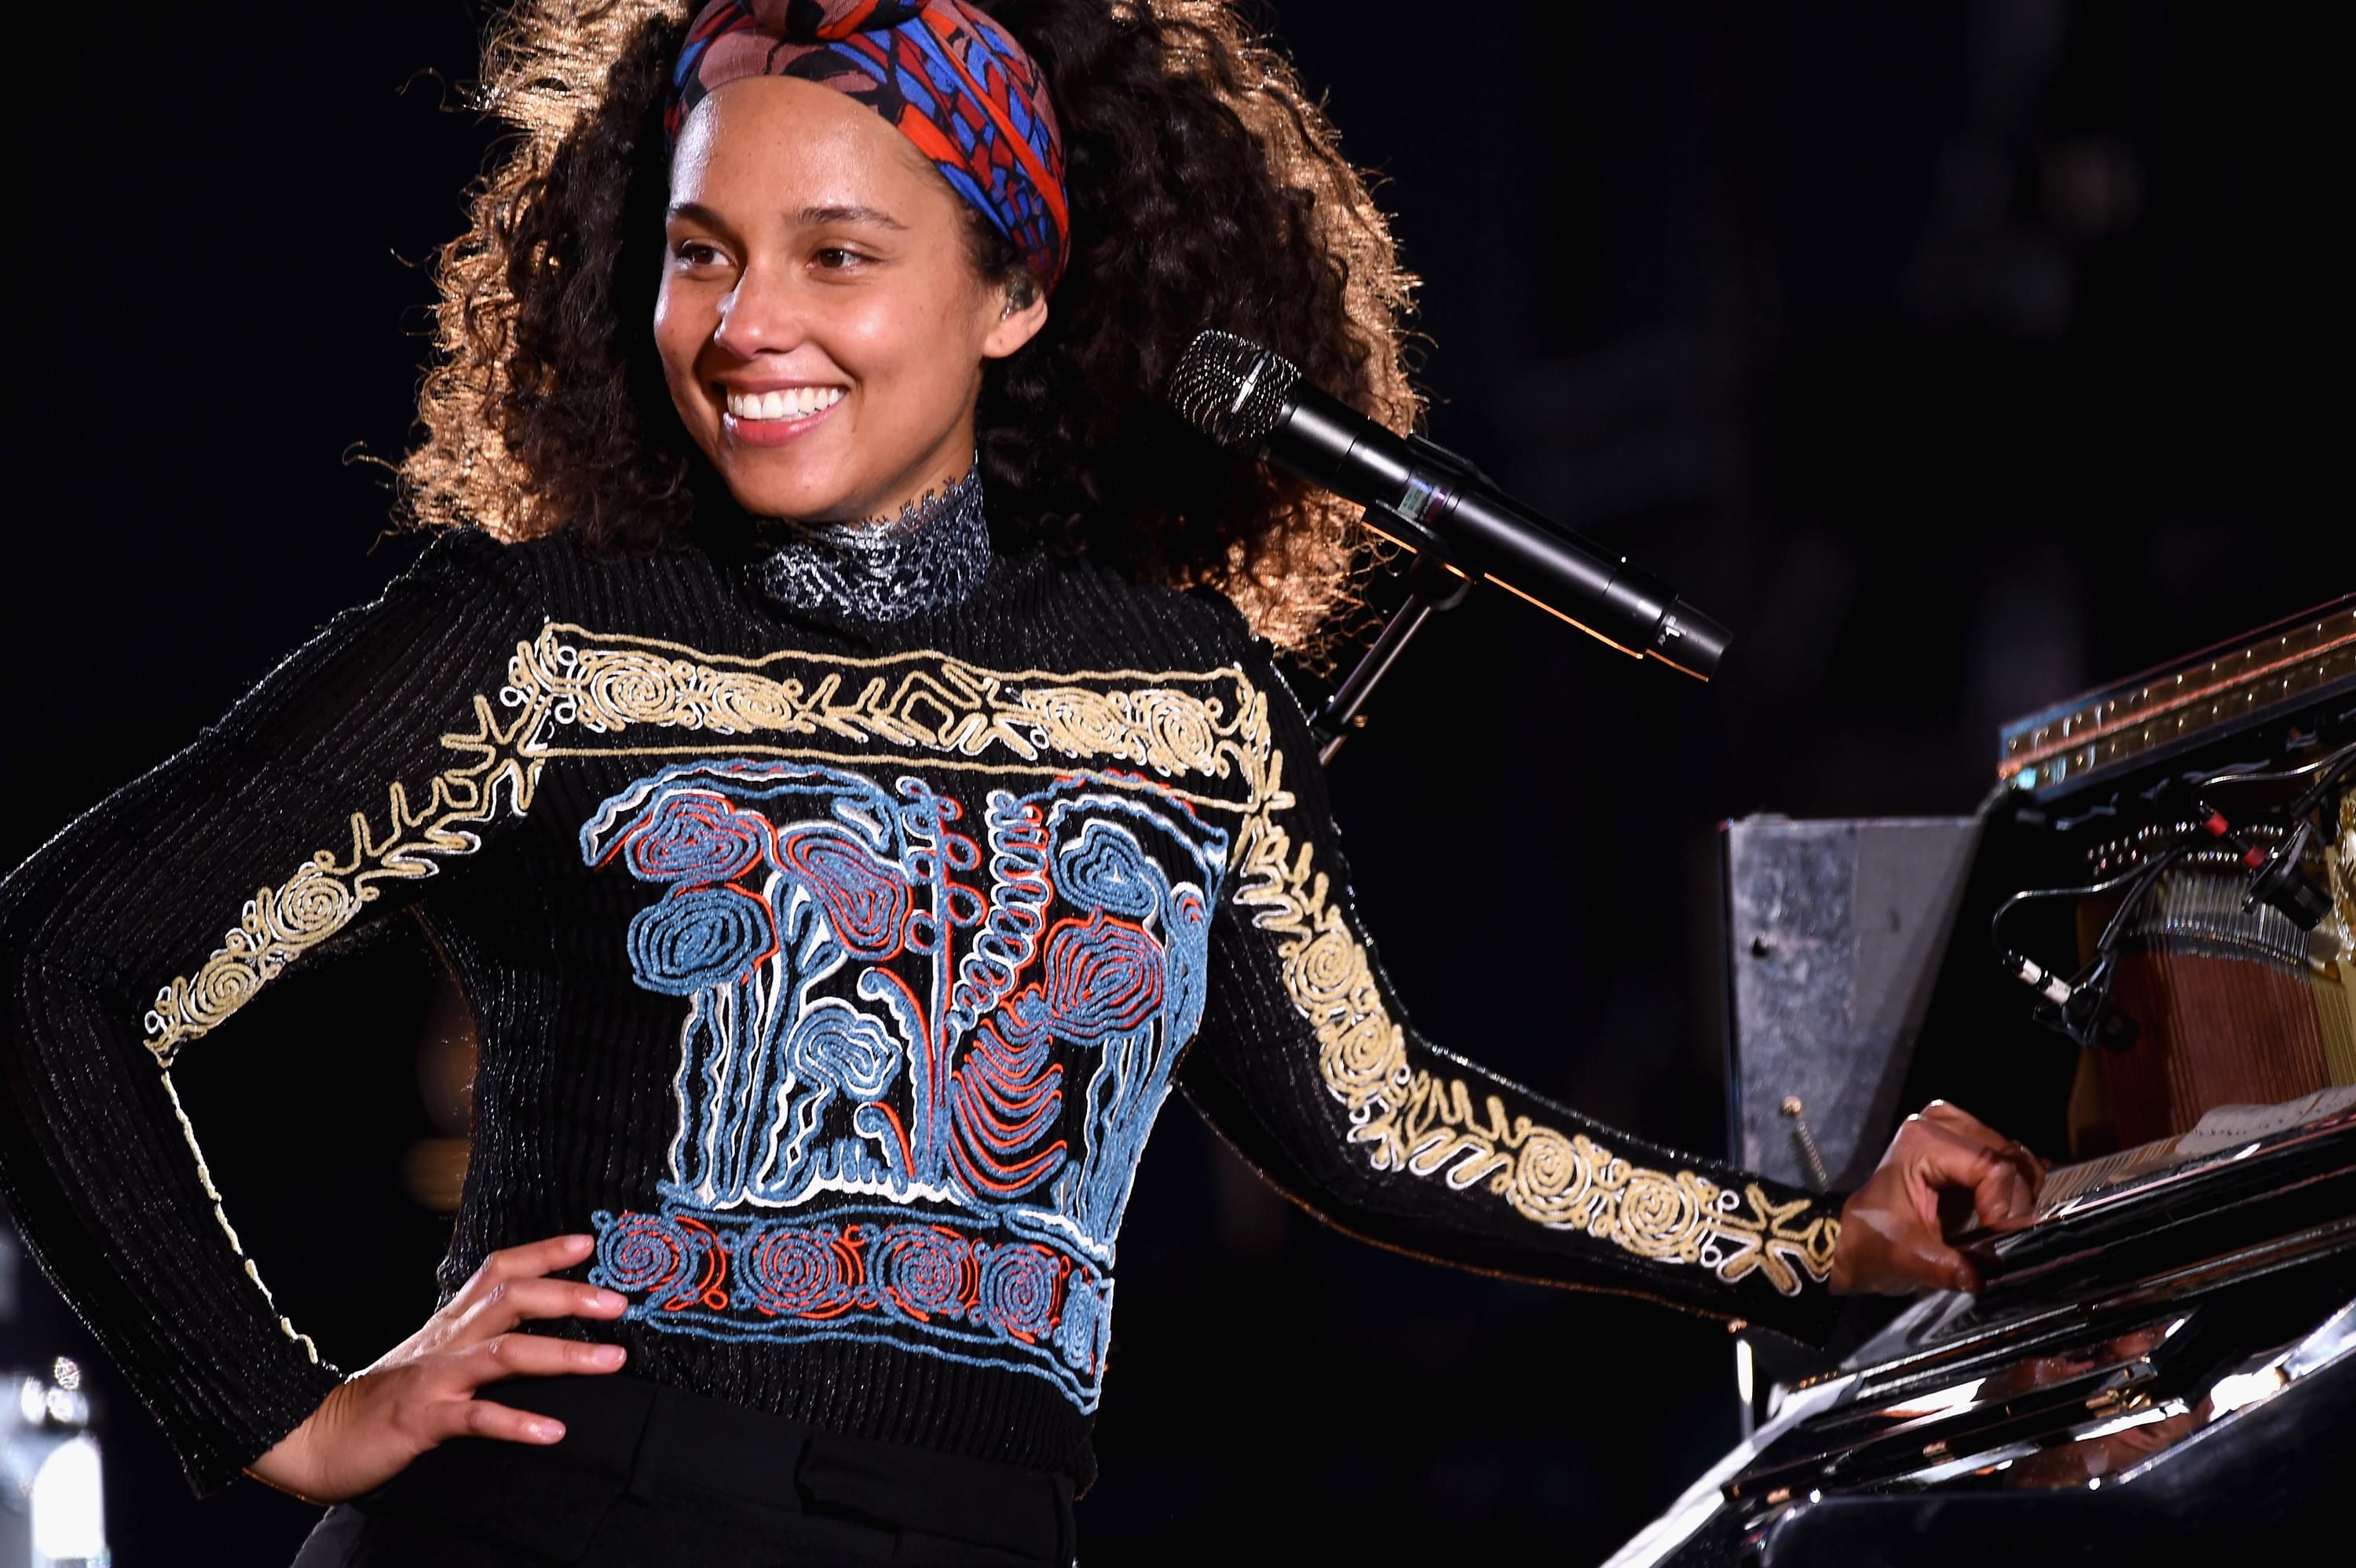 WATCH Alicia Keys’ Latest Music Video ‘Blended Family (What You Do For Love)’ Featuring A$AP Rocky